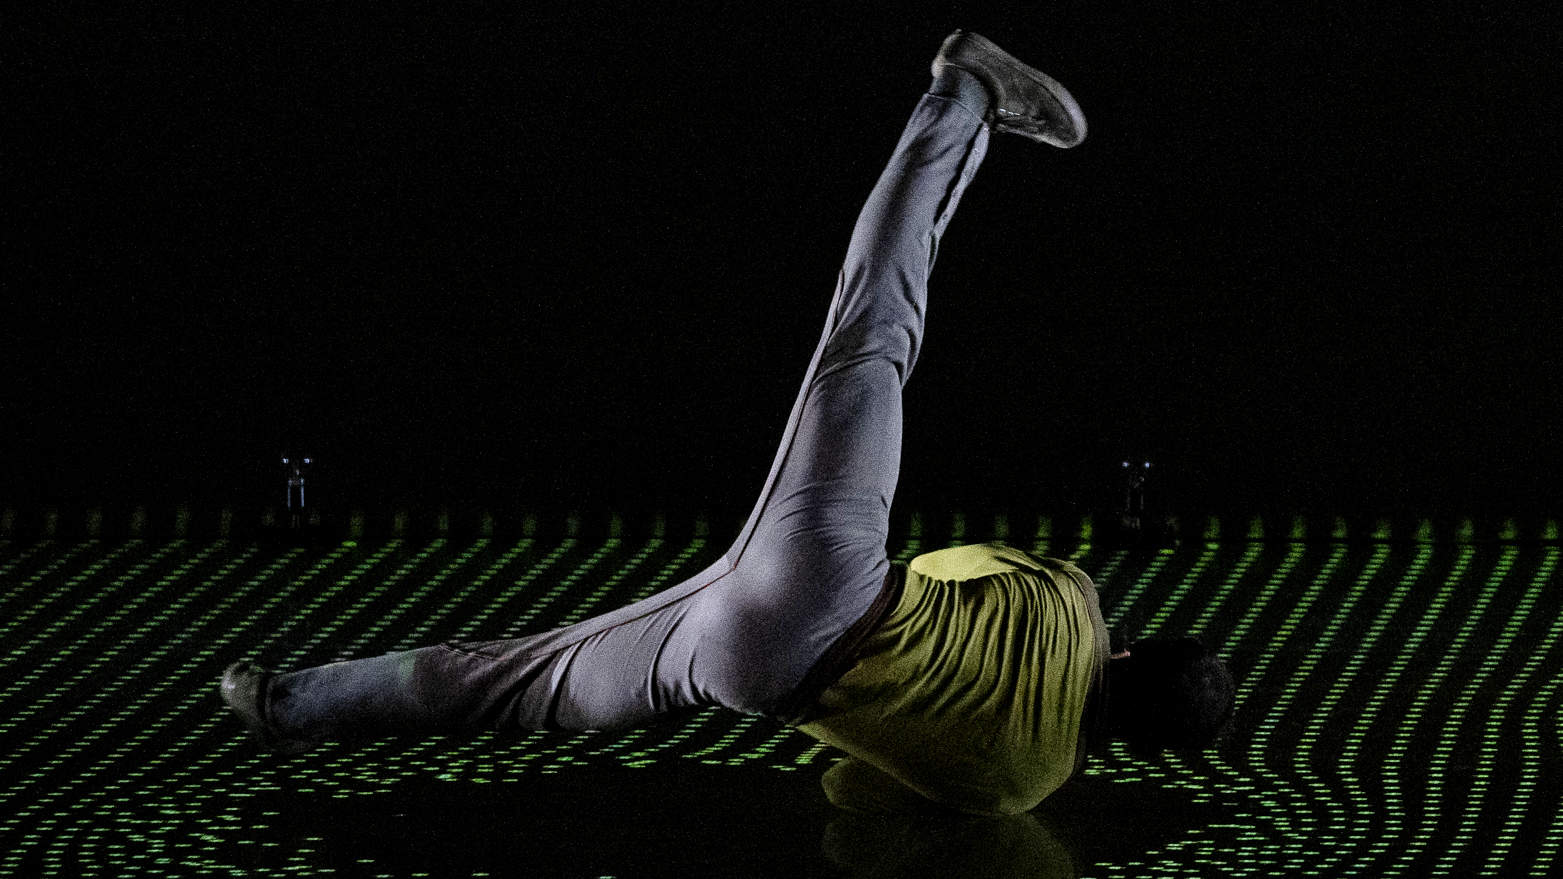 Dancers in Compagnie Käfig perform with lights in digital projections in in 'Pixel.' Press photo courtesy of Jacob's Pillow Dance Festival